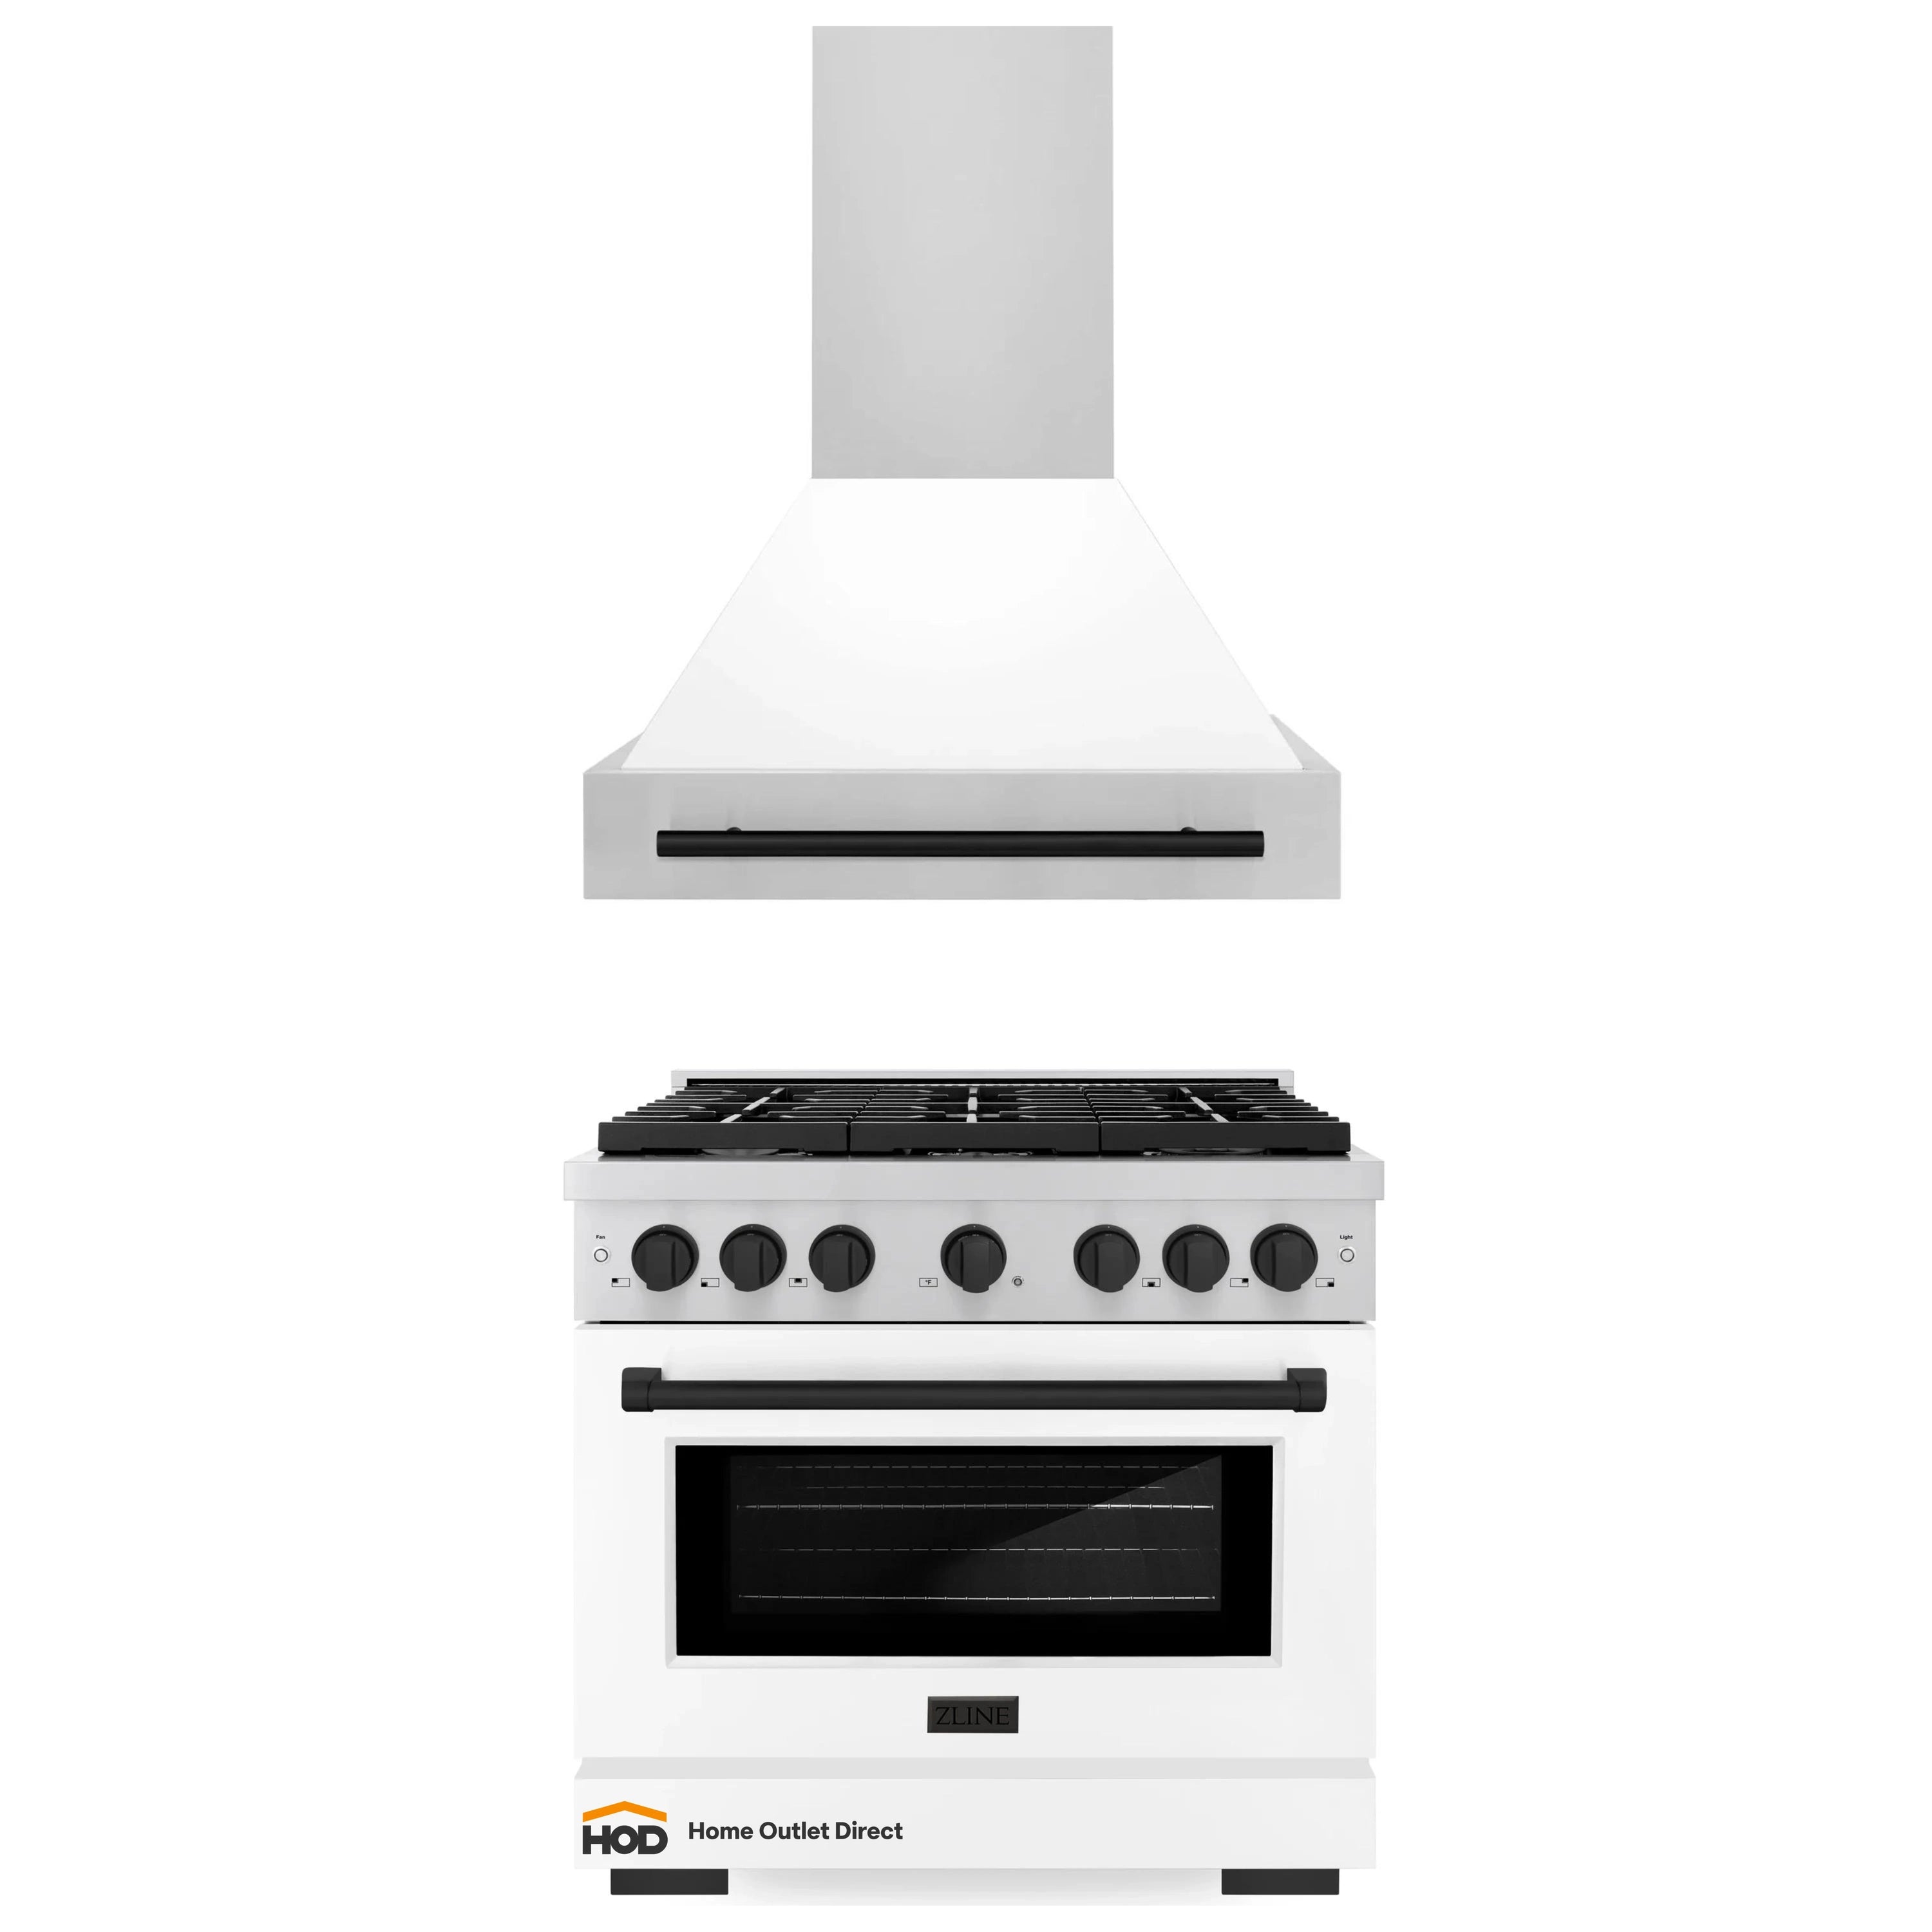 ZLINE Autograph Edition 2-Piece Appliance Package - 36-Inch Gas Range & Wall Mounted Range Hood in Stainless Steel and White Door with Matte Black Trim (2AKP-RGWMRH36-MB)